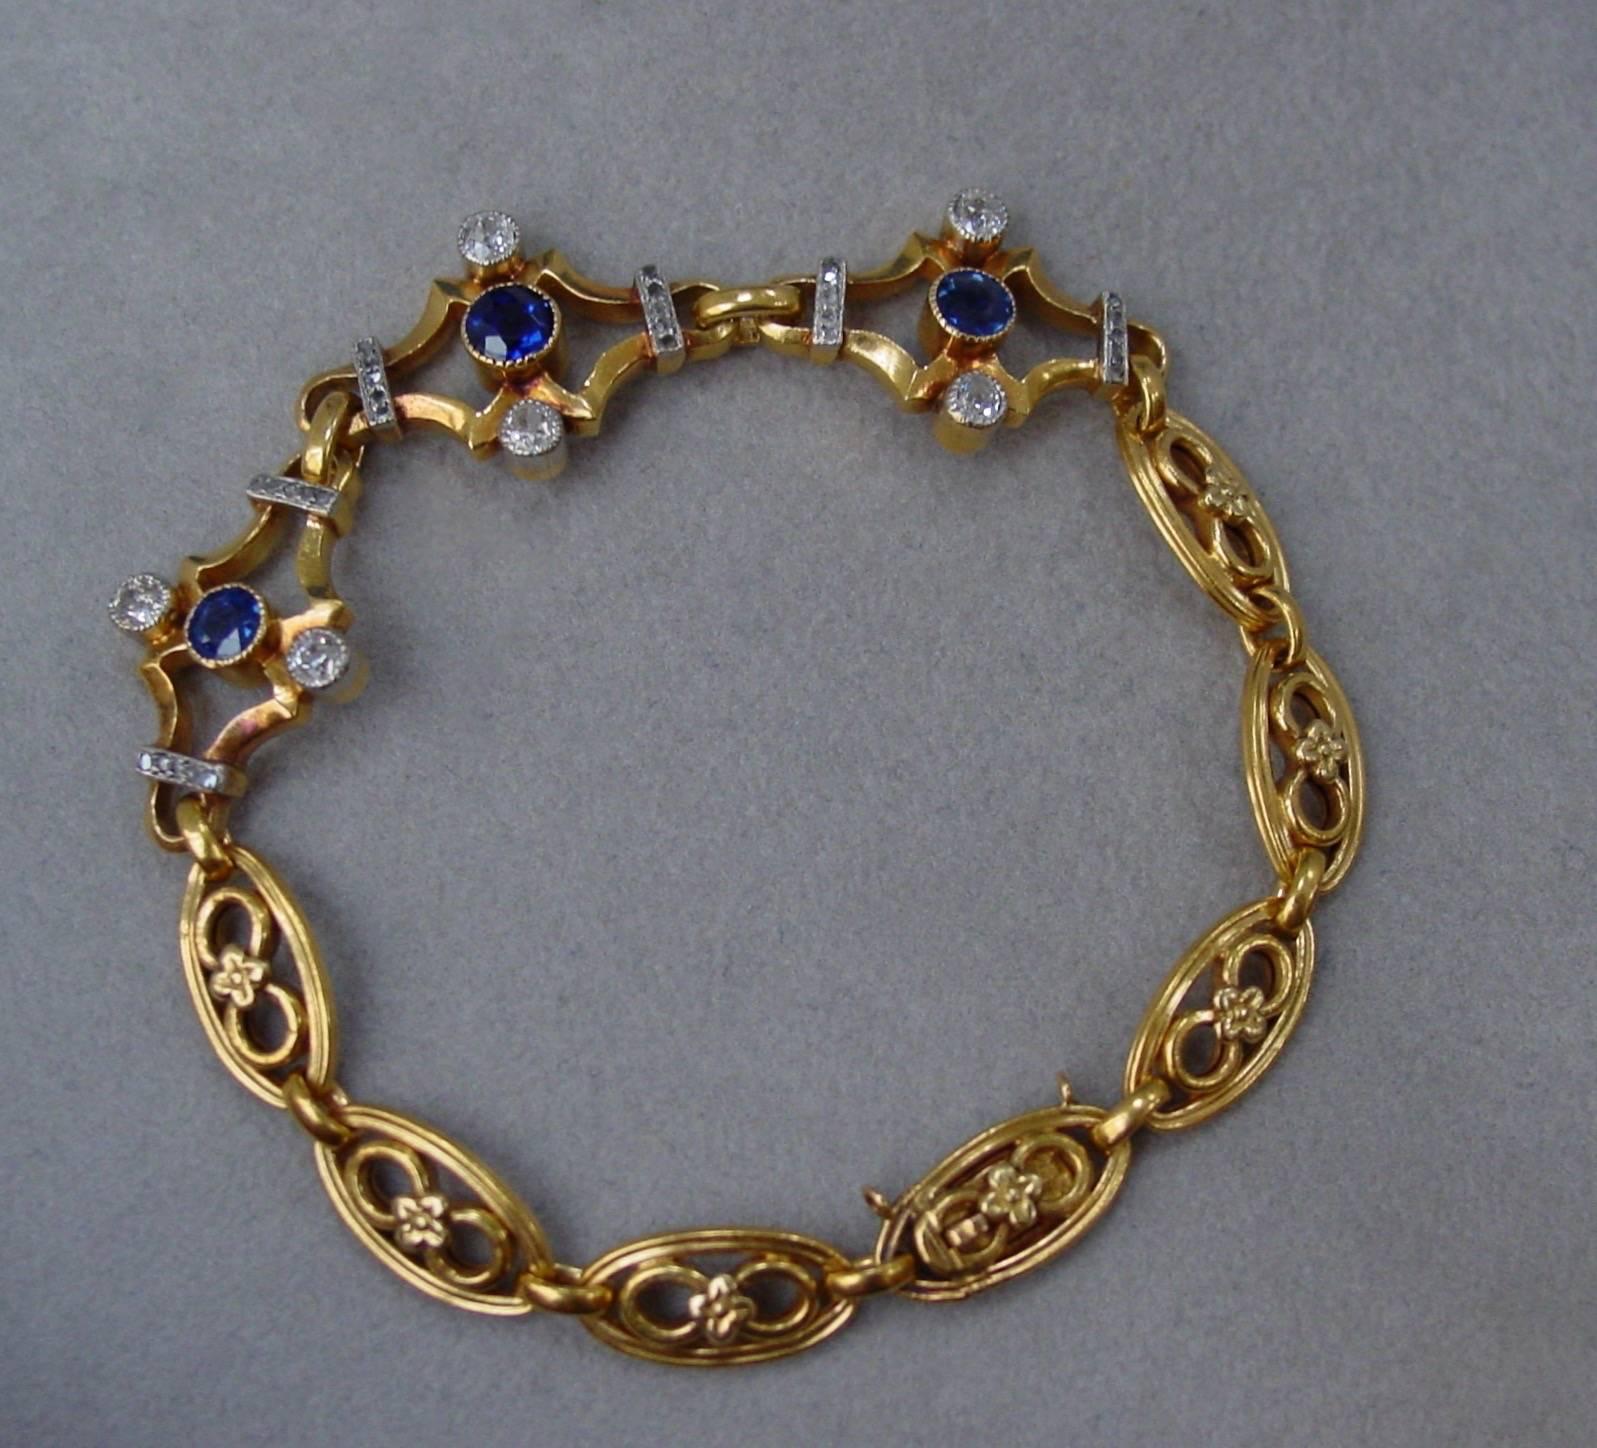 A very pretty 18 karat yellow gold sapphire and diamond bracelet from the early 20th century. With French hallmarks and stamped 18k this bracelet has a lovely soft patina and is set with approximately .60 carats of sapphires and accented by